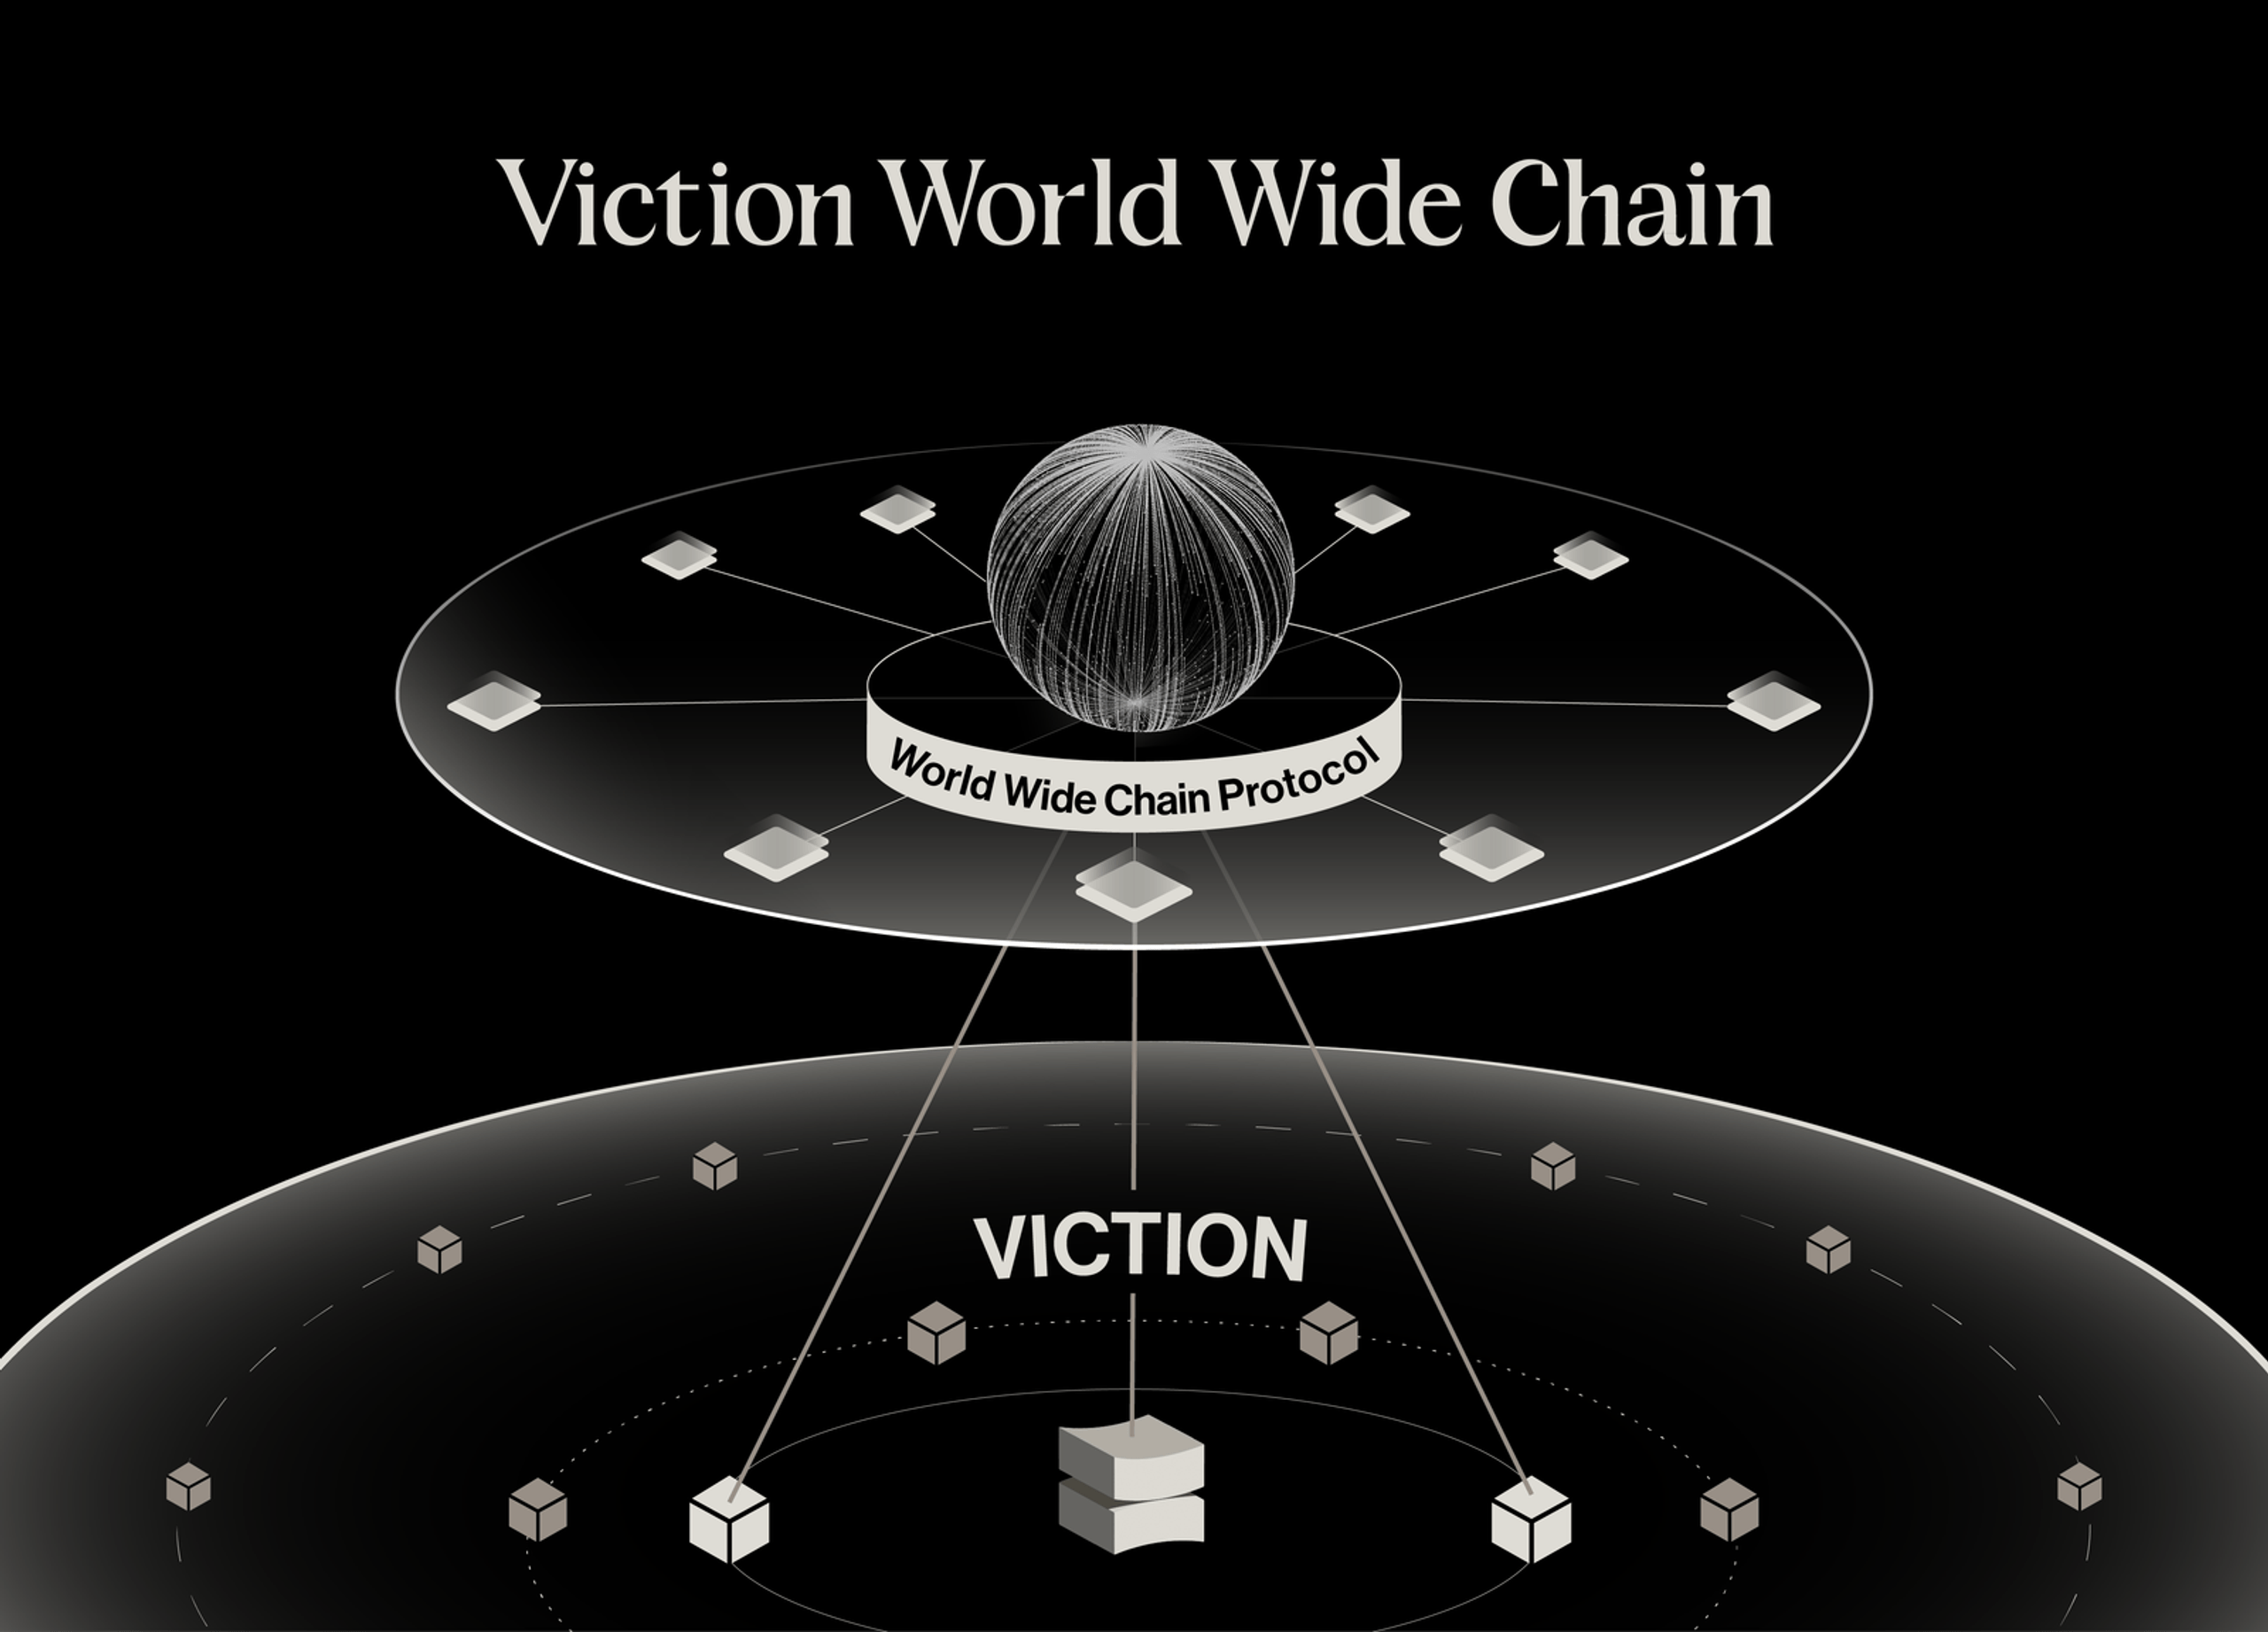 viction world wide chain vwwc